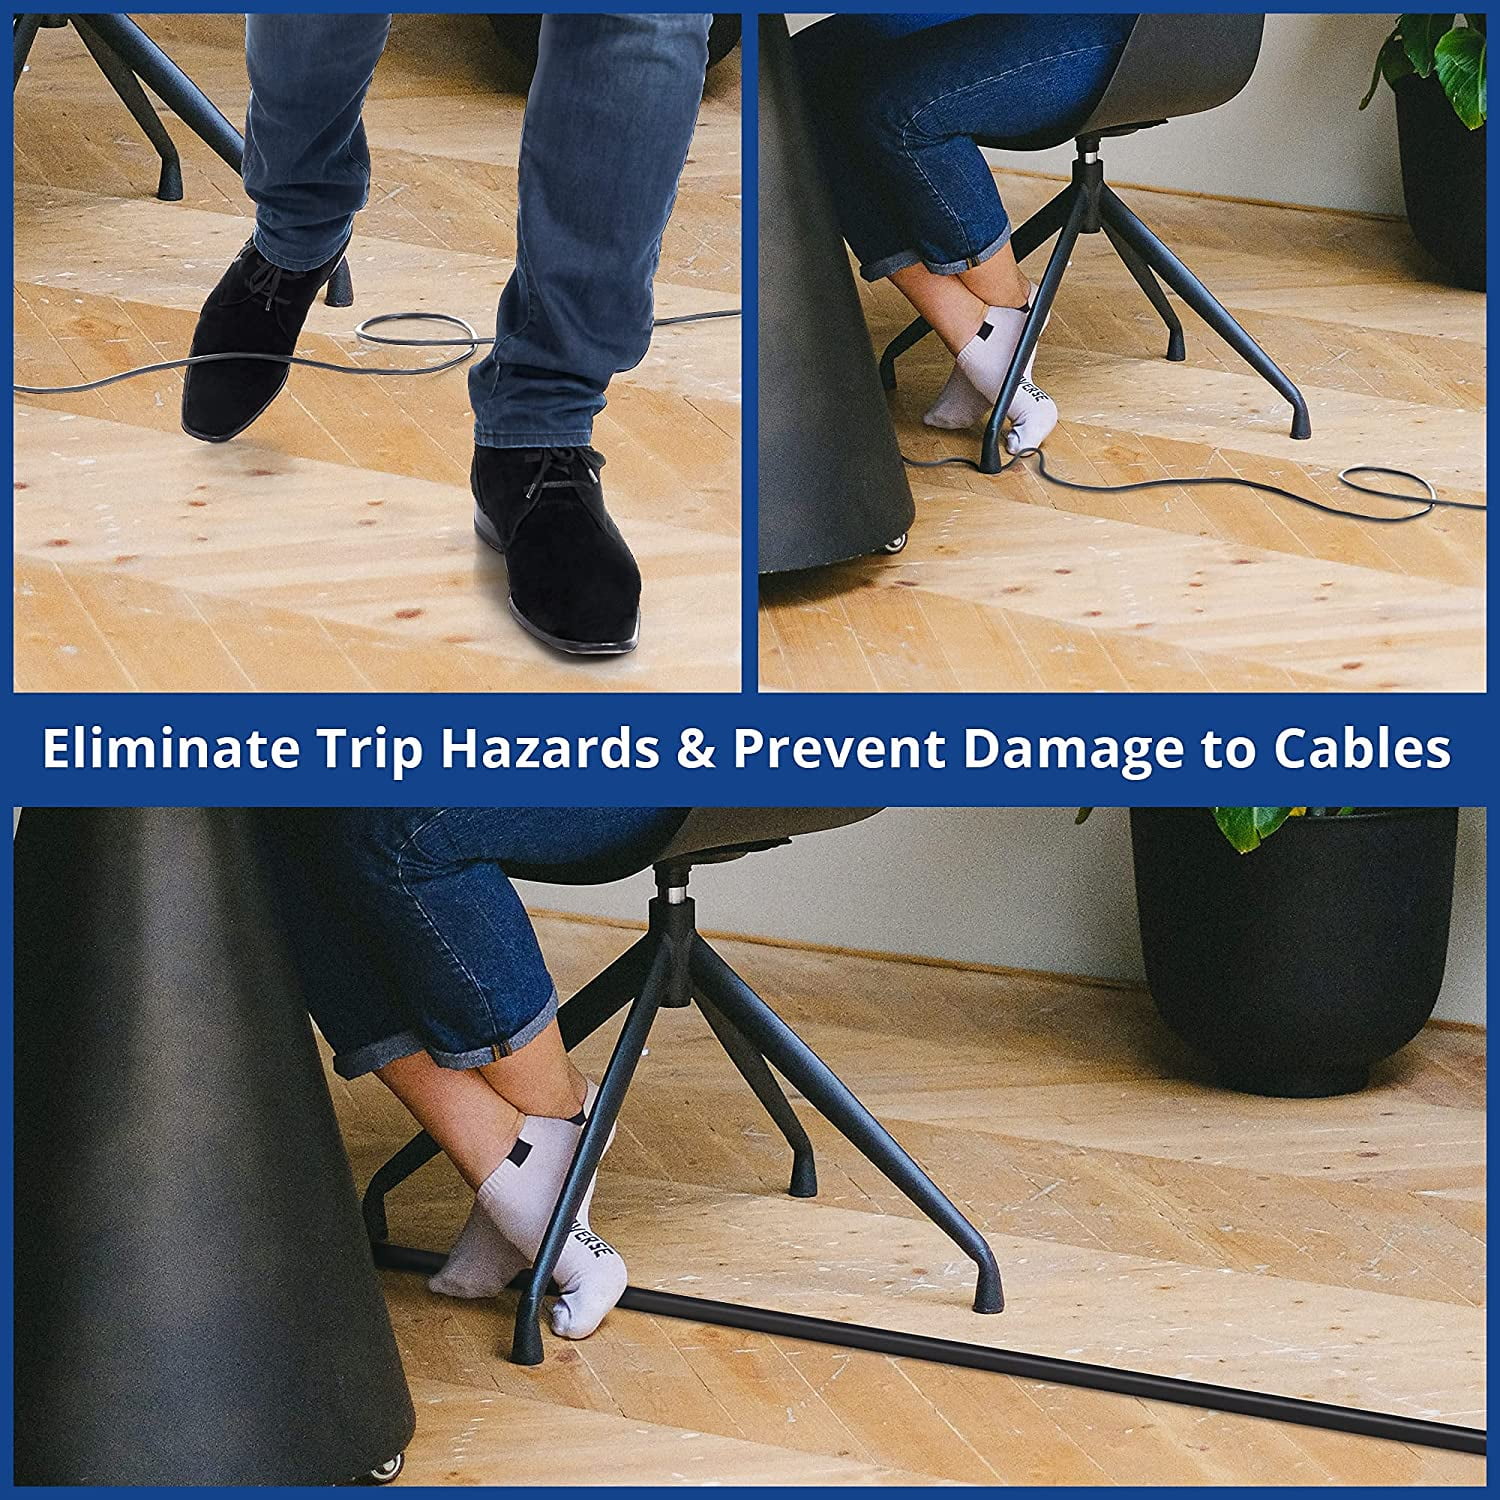 Floor Cord Cover 4Ft Heavy Duty Extension Cord Covers for Floor Cord Hider